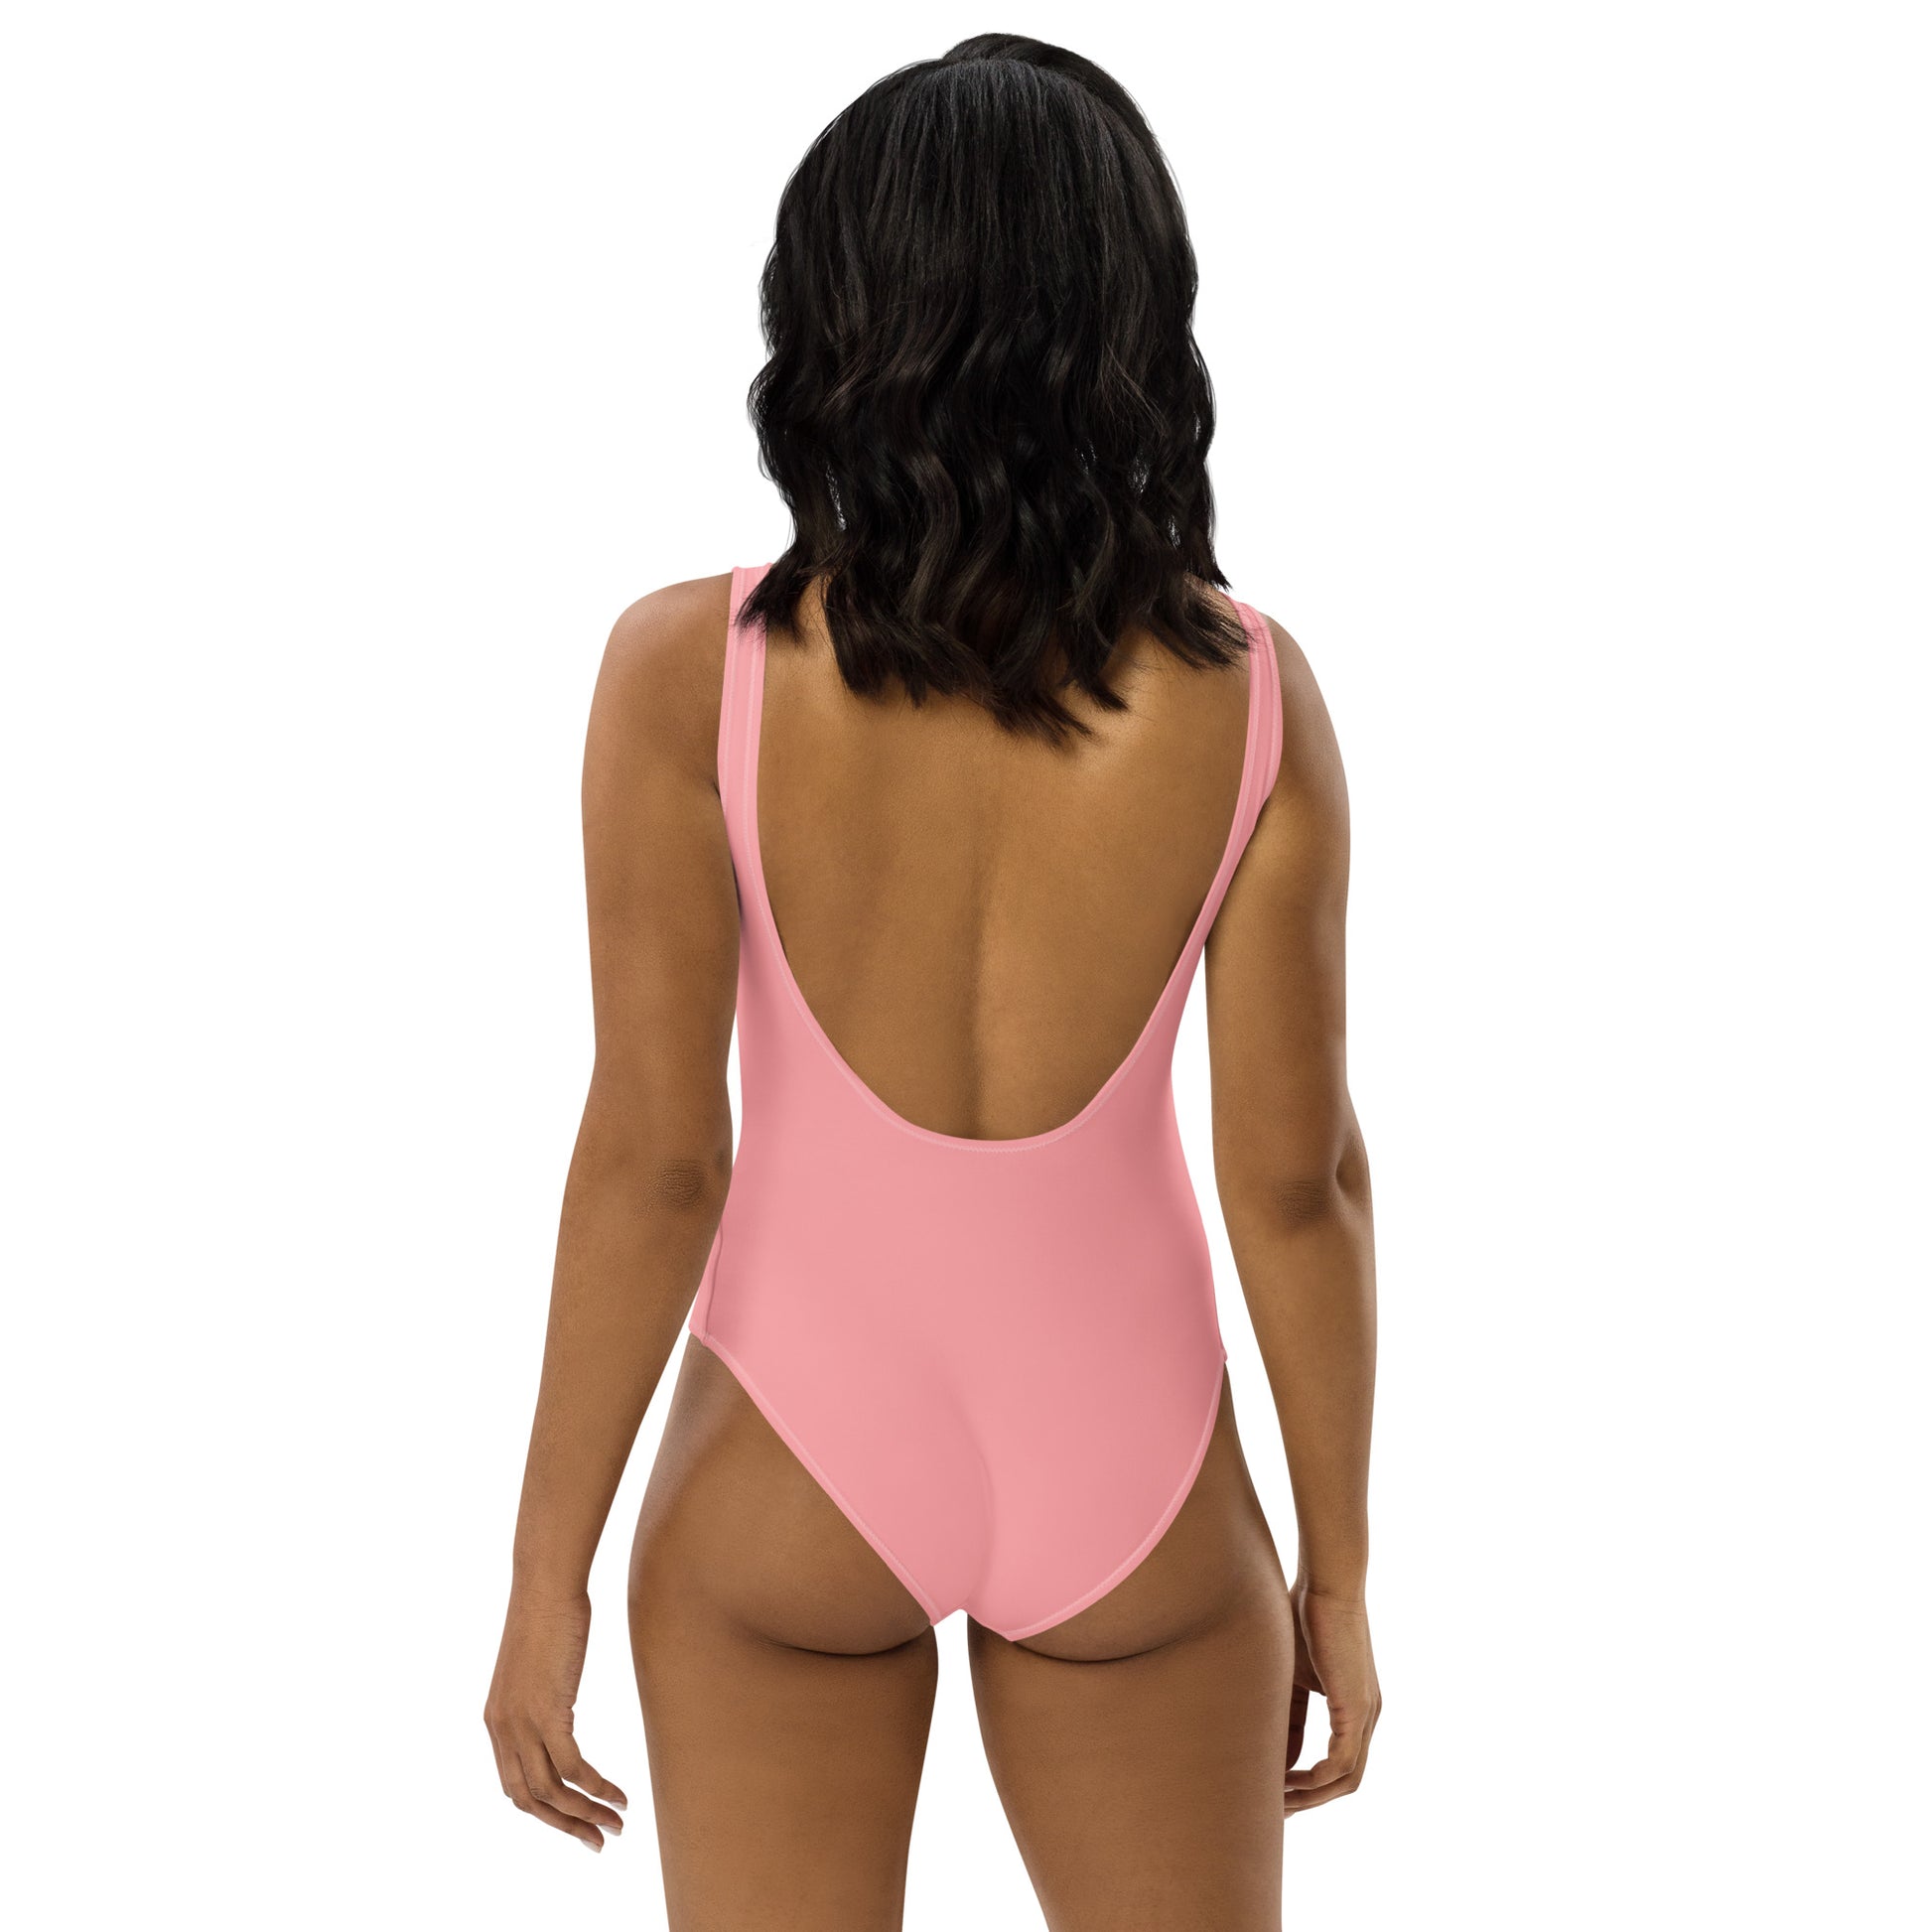 Afro-Geisha One Piece Swimsuit- South Africa